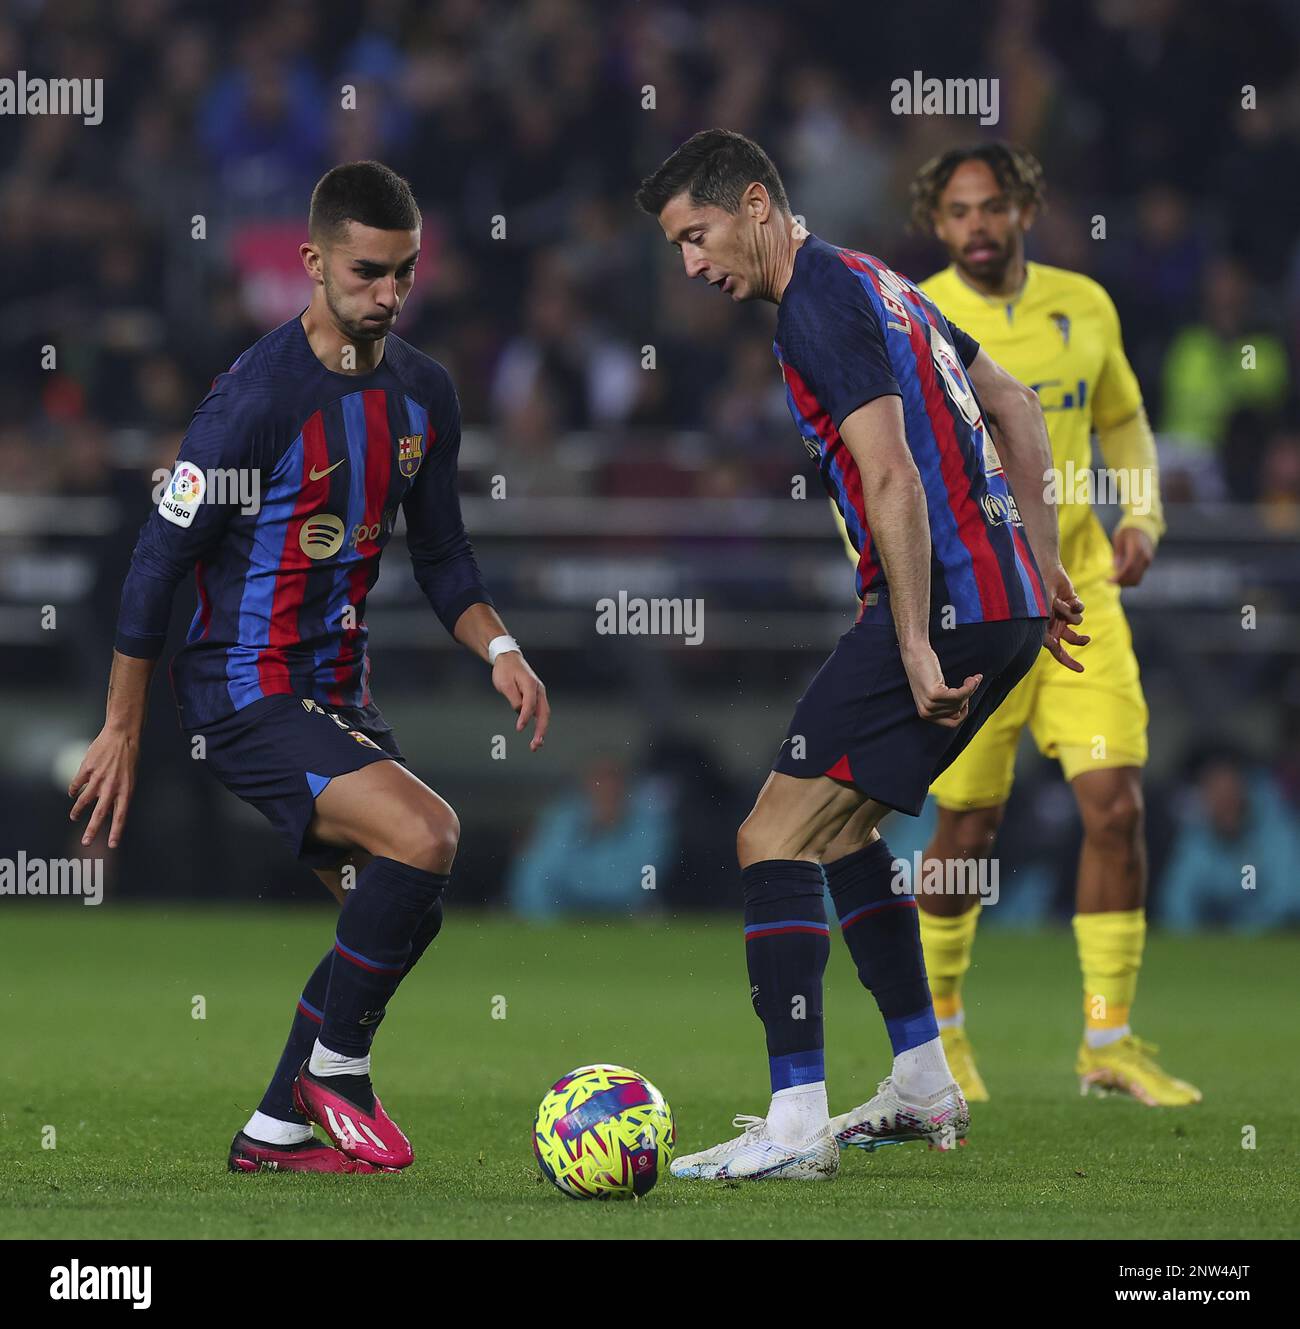 Barcelona, Spain. 19th Feb, 2023. Robert Lewandowski and Ferran Torres of Barcelona during the La Liga football match between Barcelona and Cadiz in Estadio Camp Nou in Barcelona, Spain. Barcelona won the game 2-0 (goals by Sergi Roberto 43; Robert Lewandowski 45 1) (Foto: Sports Press Photo/Sports Press Photo/C - ONE HOUR DEADLINE - ONLY ACTIVATE FTP IF IMAGES LESS THAN ONE HOUR OLD - Alamy) Credit: SPP Sport Press Photo. /Alamy Live News Stock Photo